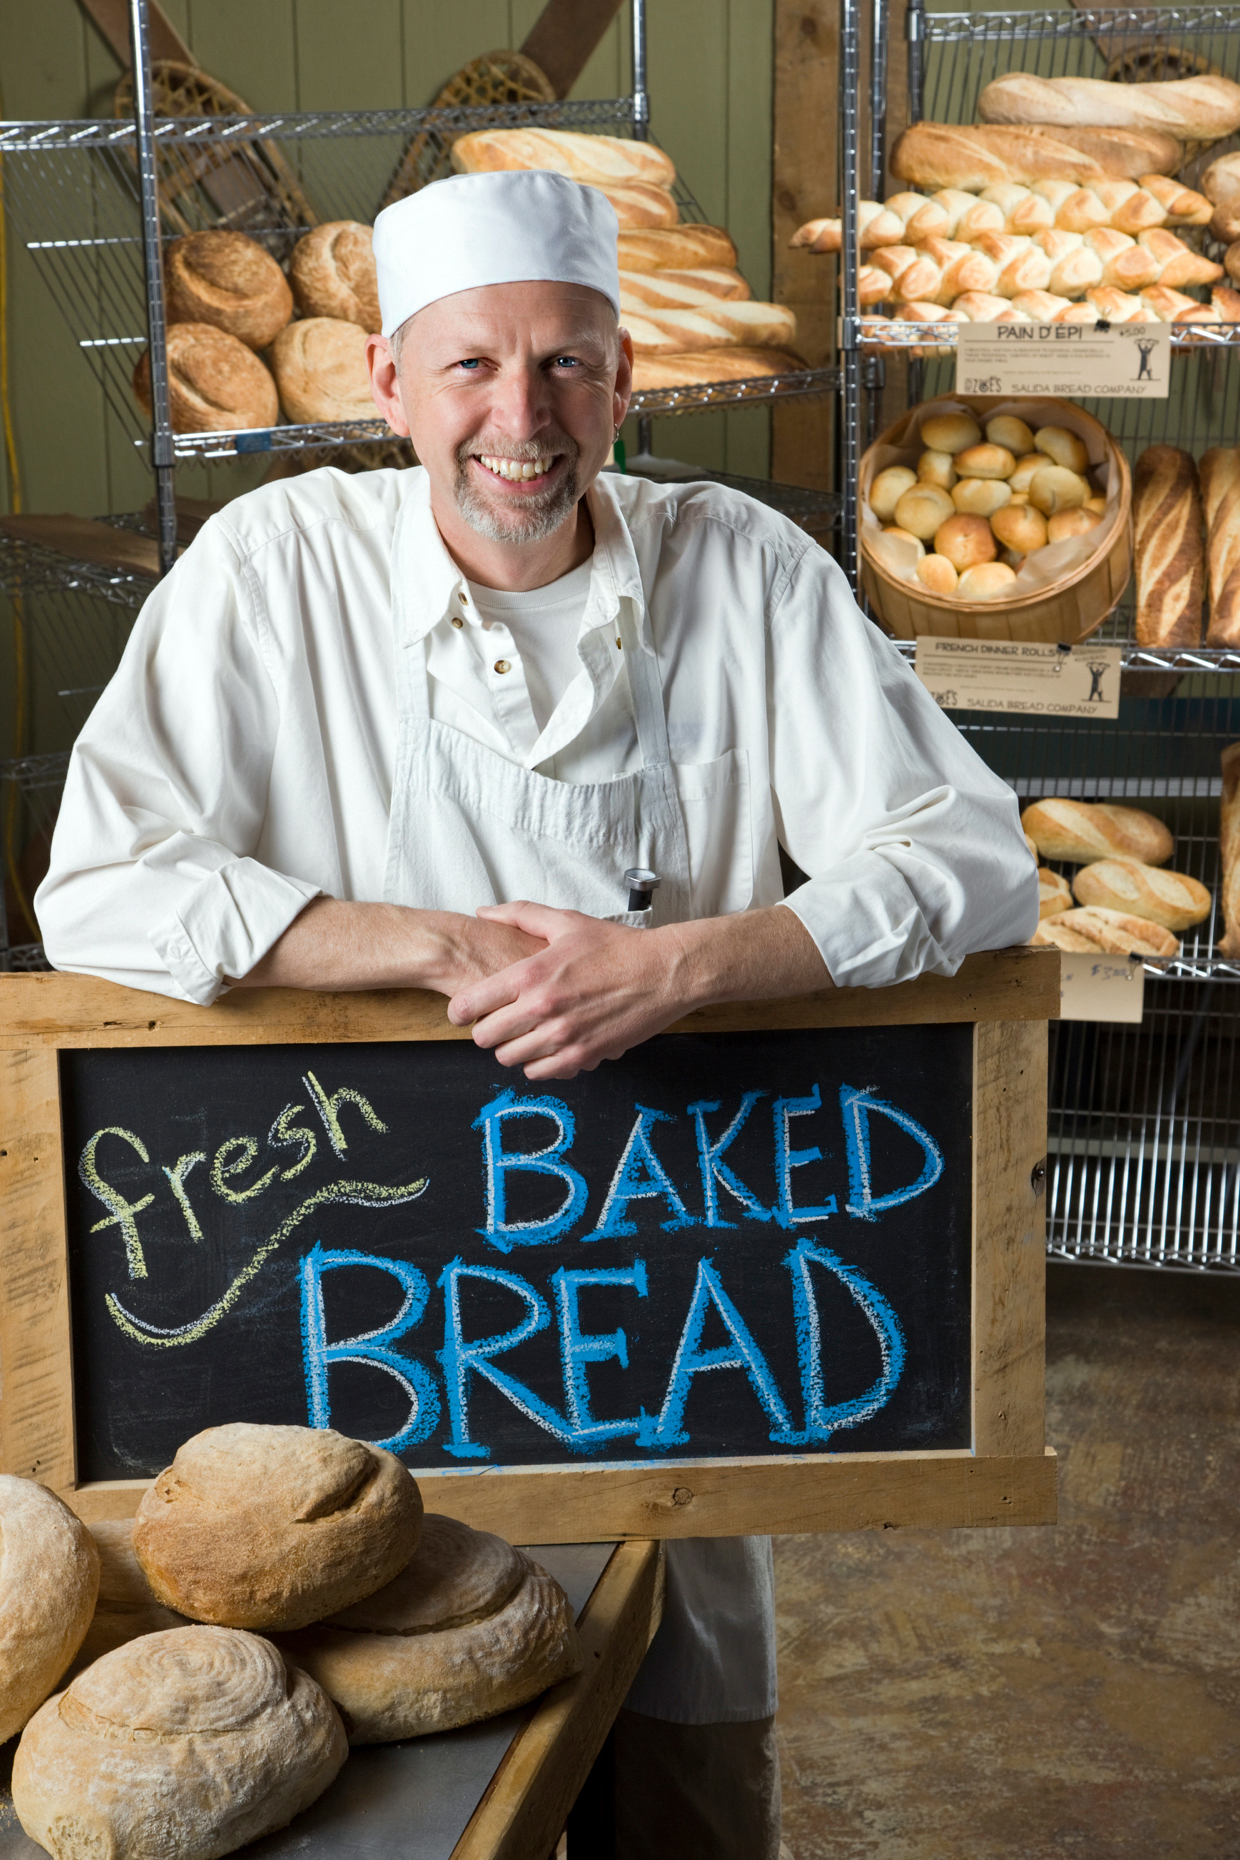 Professional cook preparing fresh bread in a commercial bakery